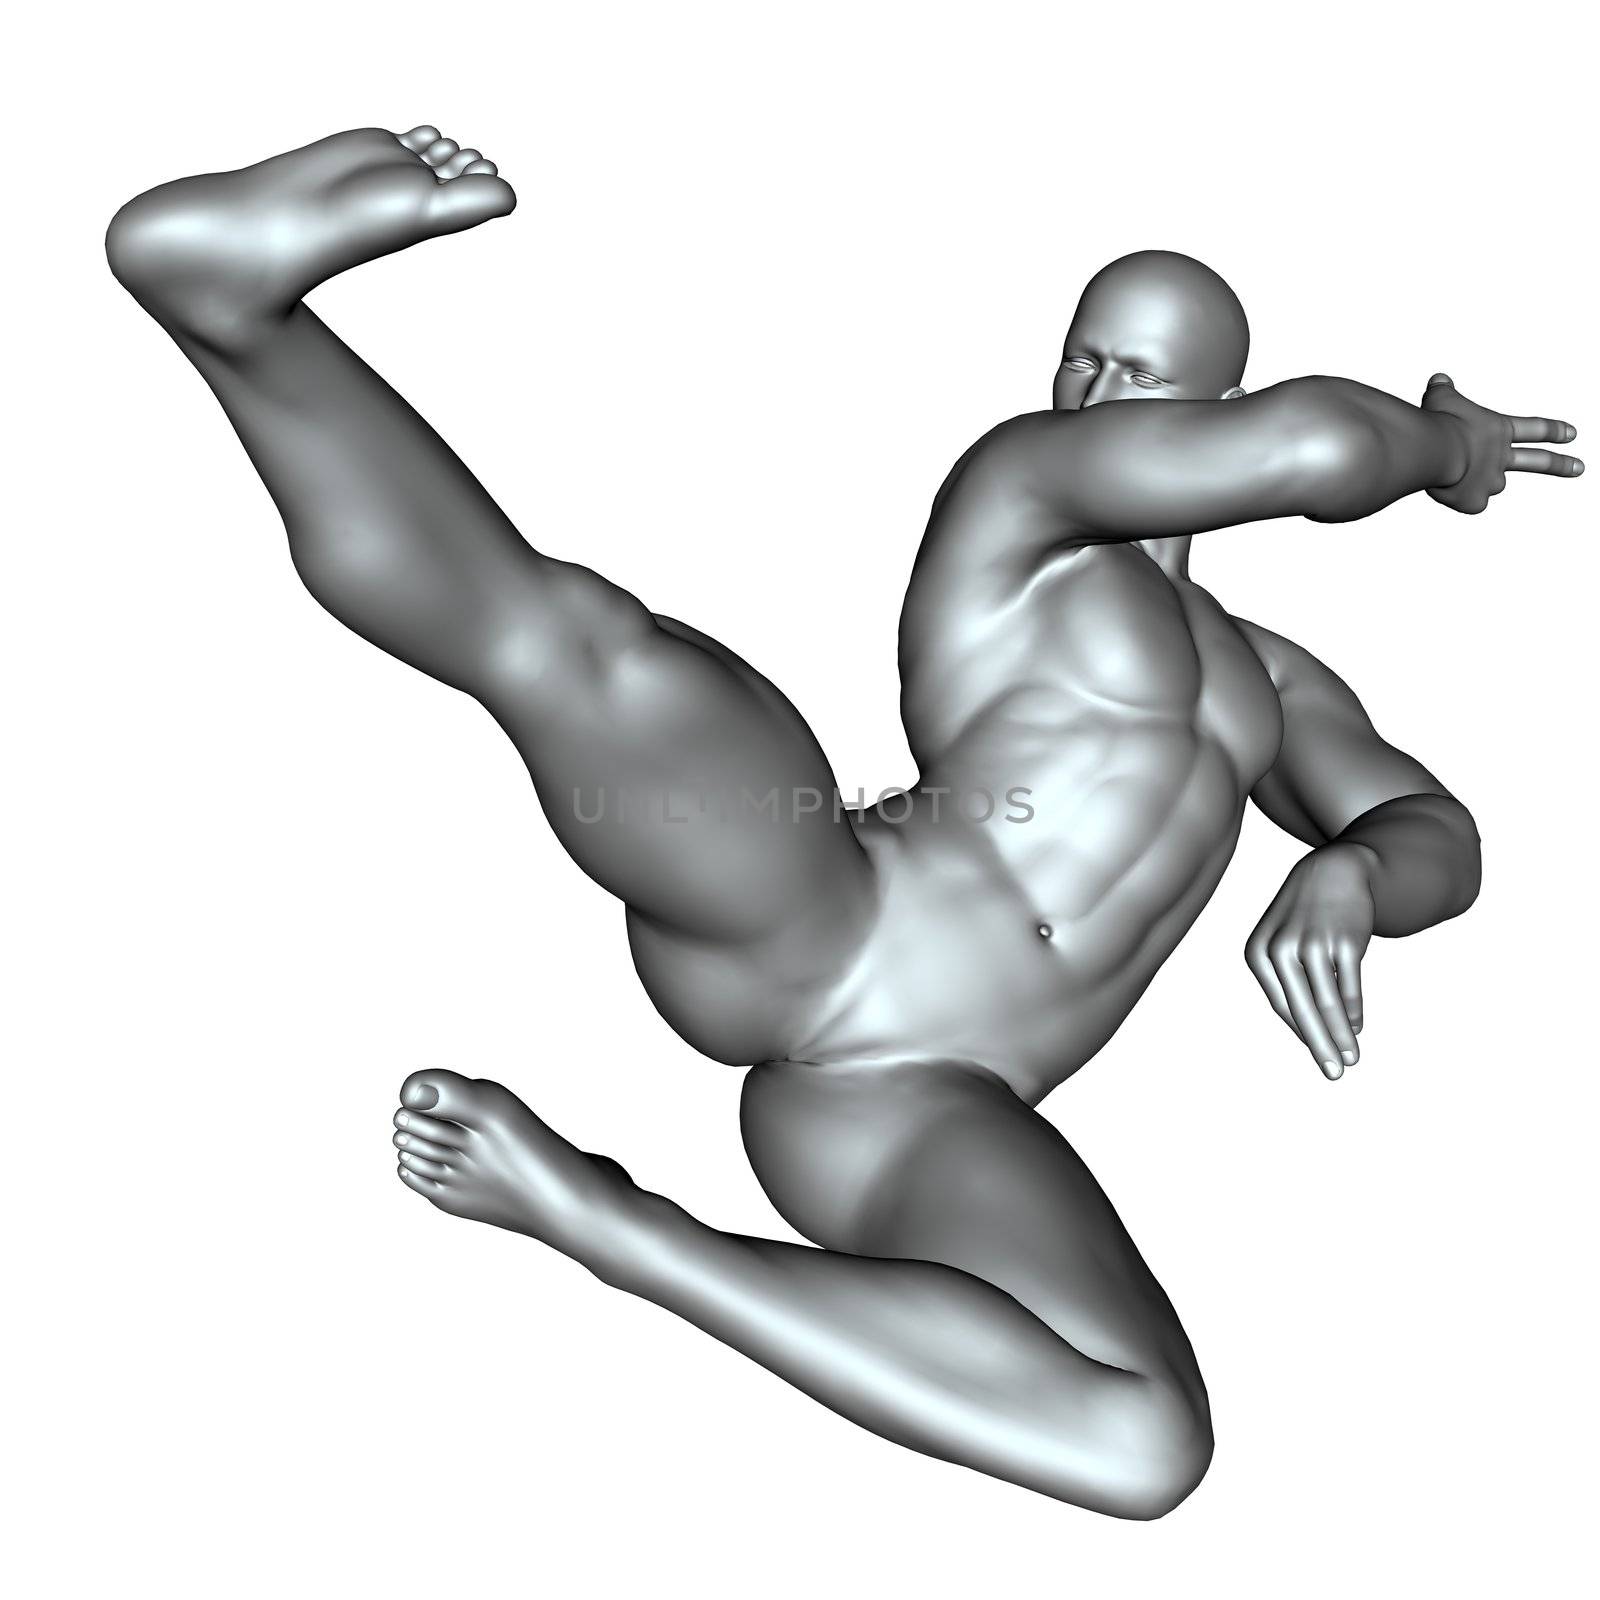 3D rendered fighter on martial arts poses on white background isolated